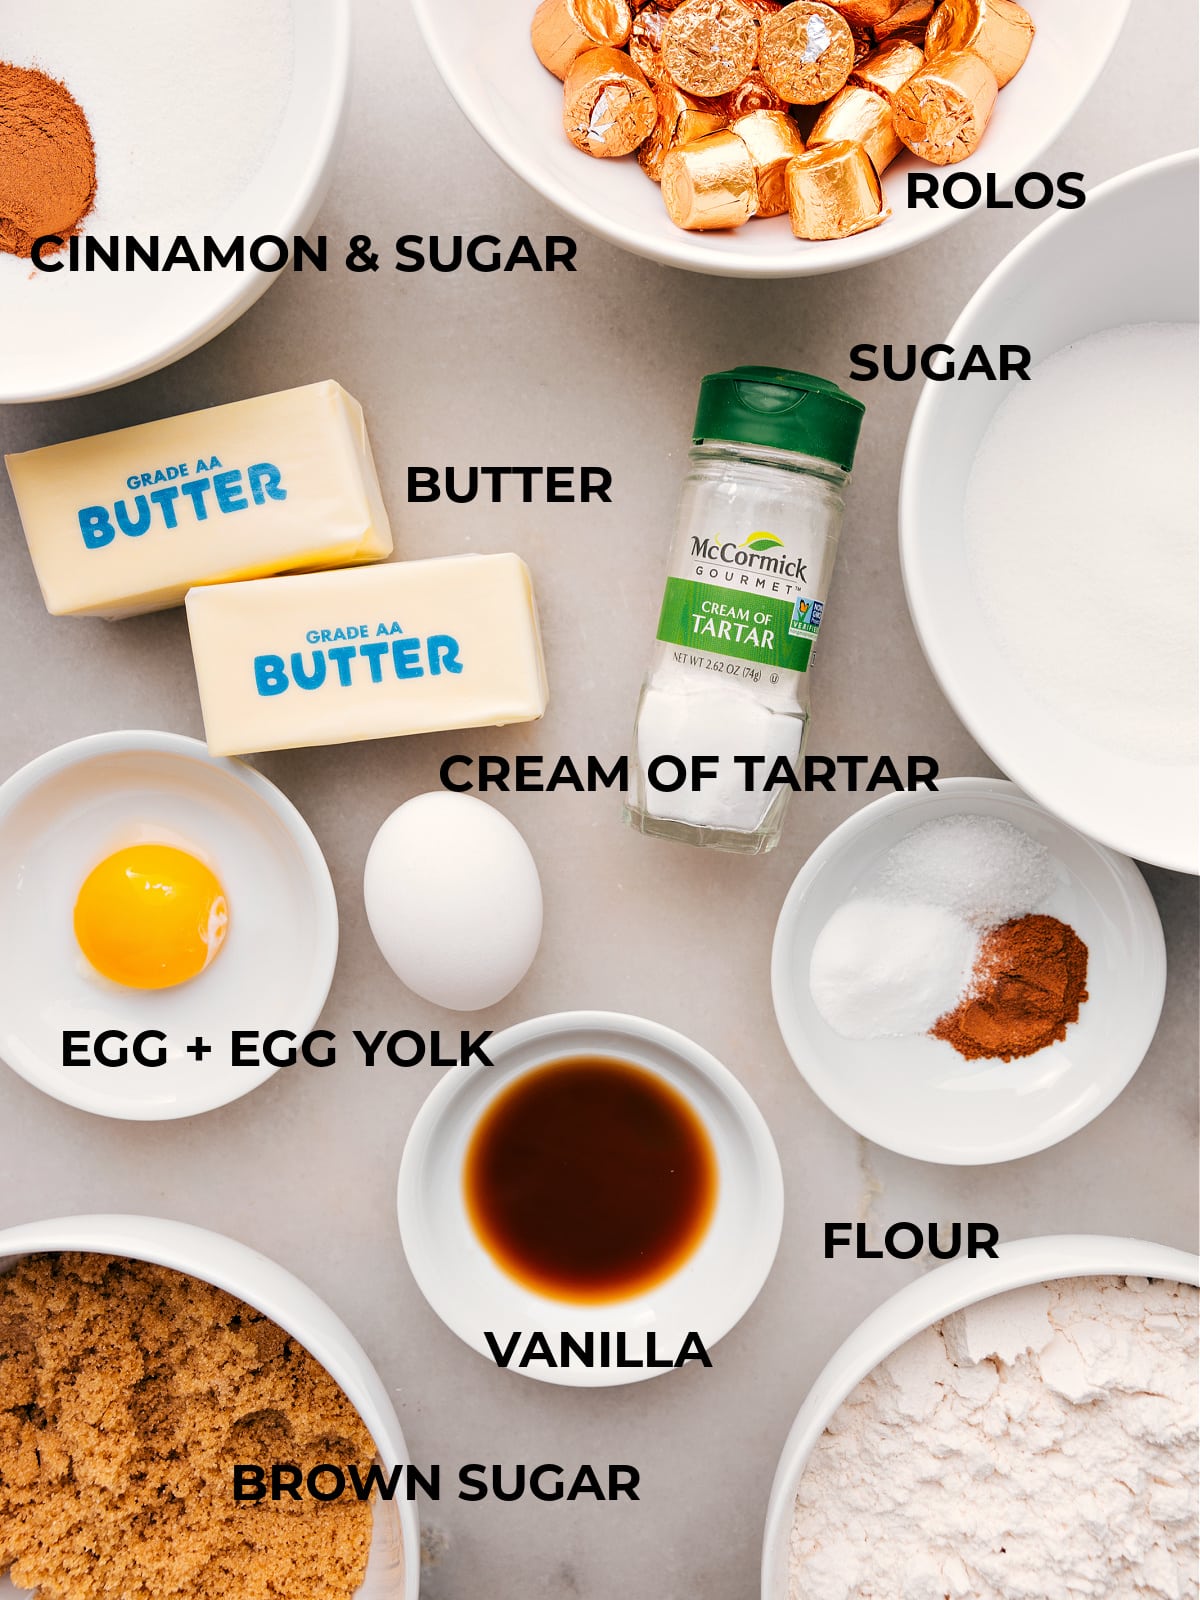 An assortment of baking ingredients, featuring butter, cinnamon and sugar, flour, and more.